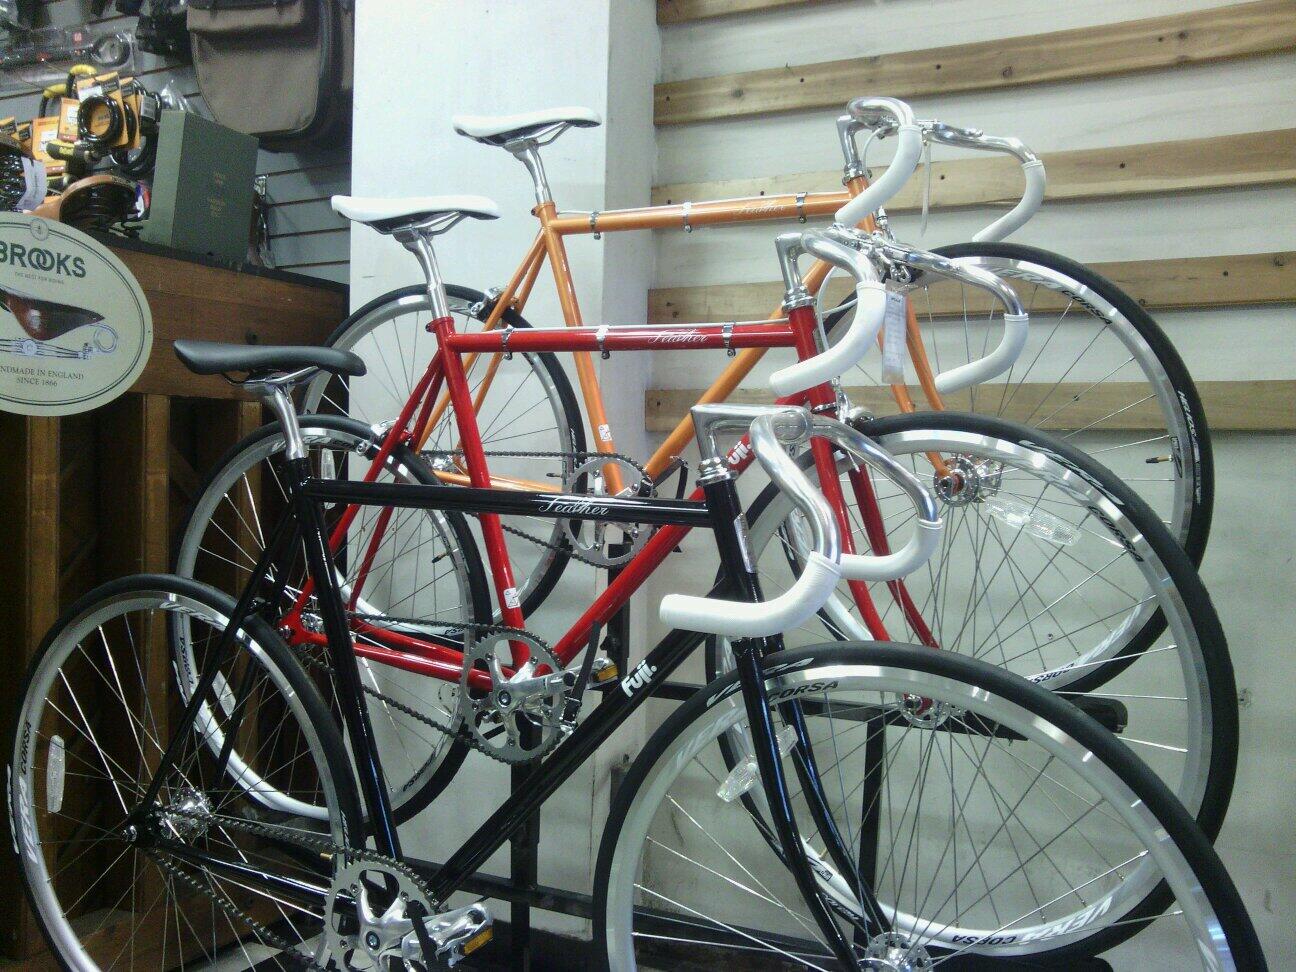 bikehounds on Twitter: "Introducing the Feather Singlespeed/fixed, butted cromo, black or orange. $649 http://t.co/63hQS3dEZW" / Twitter